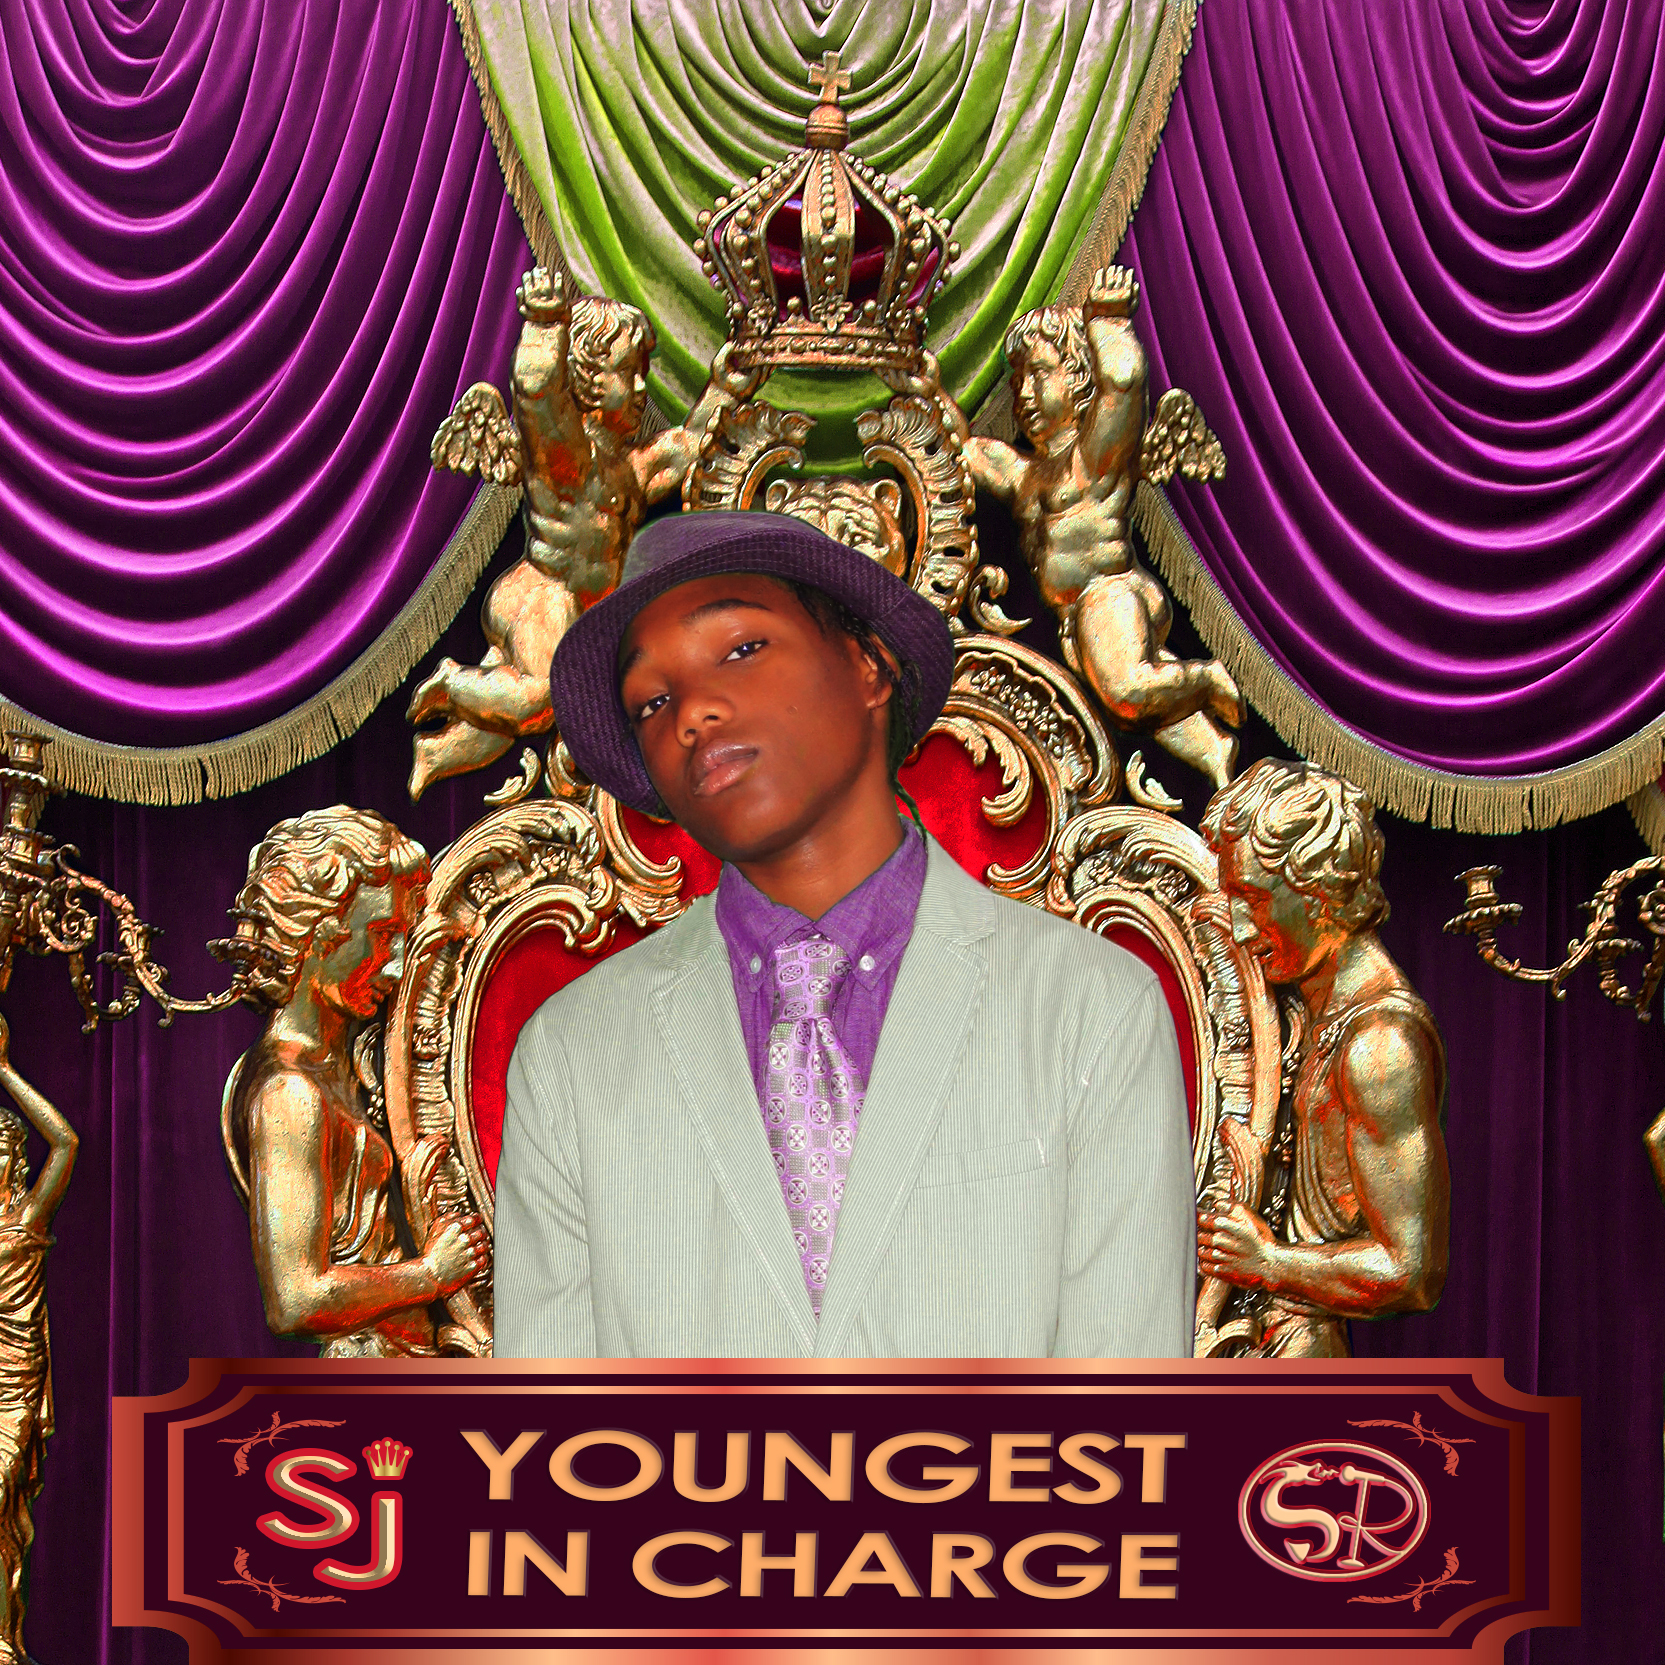 [Mixtape] @SuspensJr ‘Youngest in Charge’